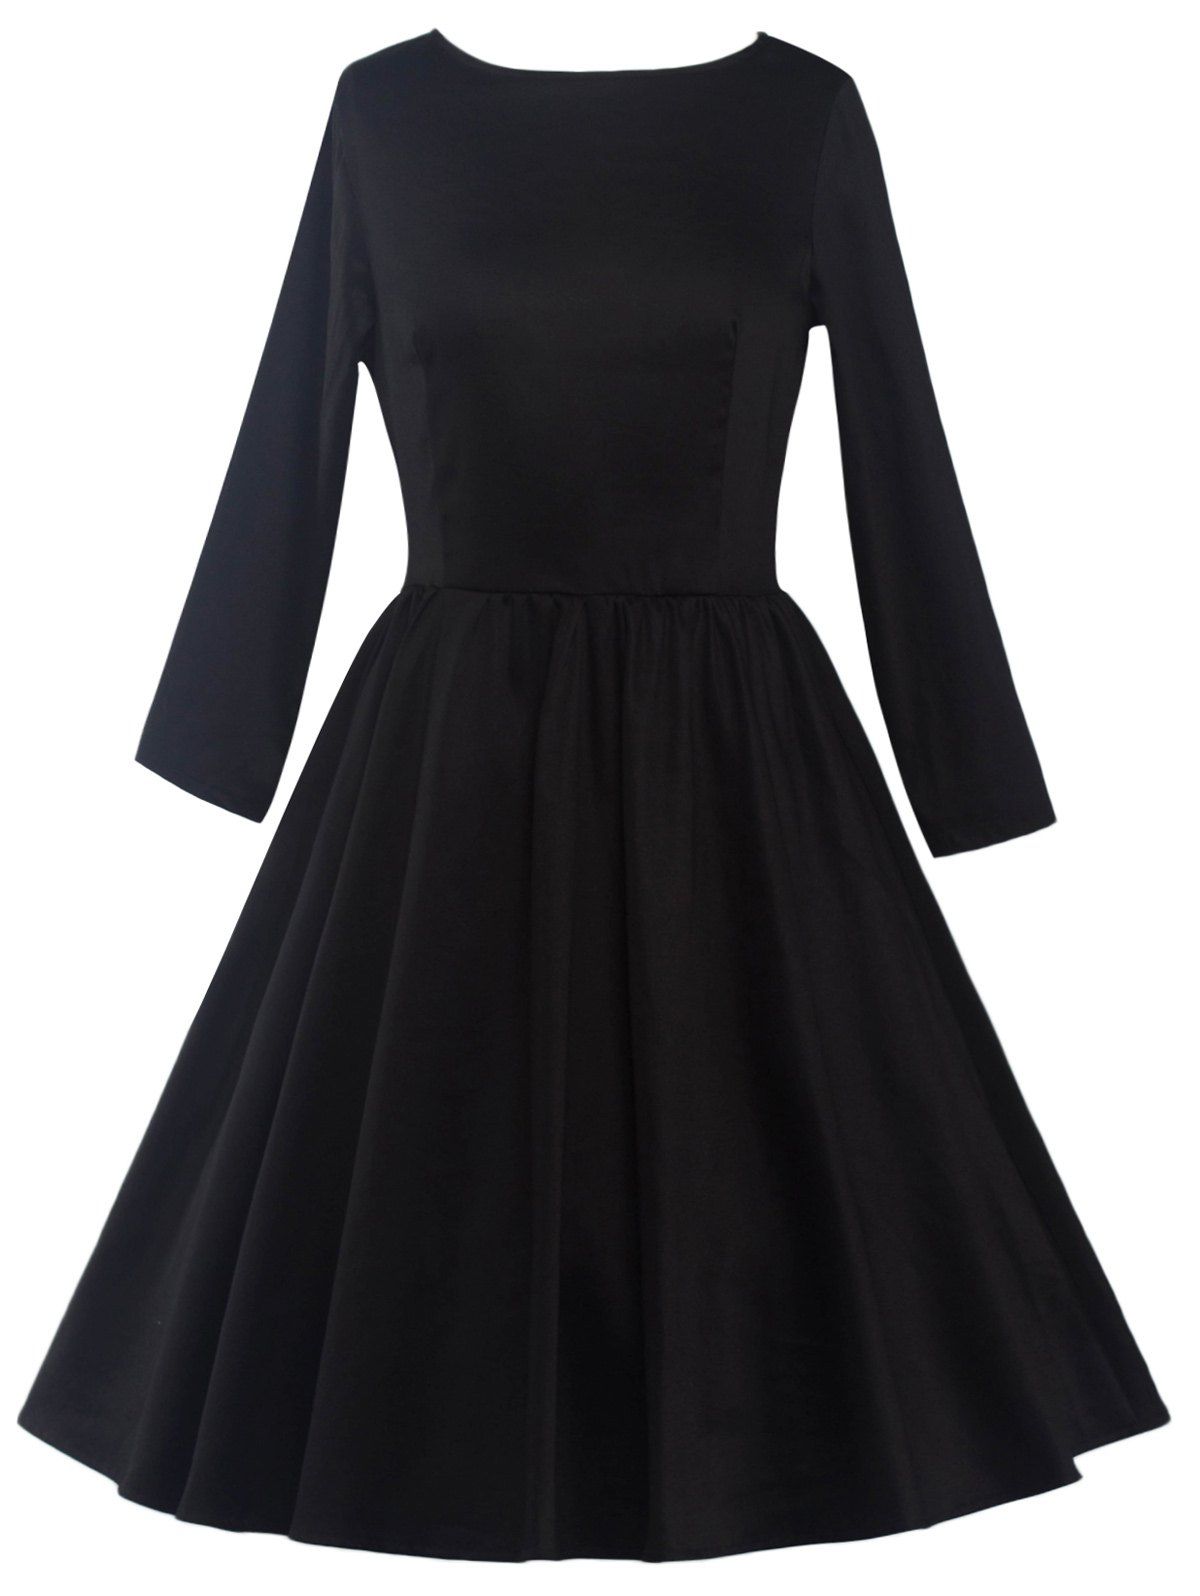 [41% OFF] 2021 Long Sleeve Fit And Flare Dress In BLACK | DressLily